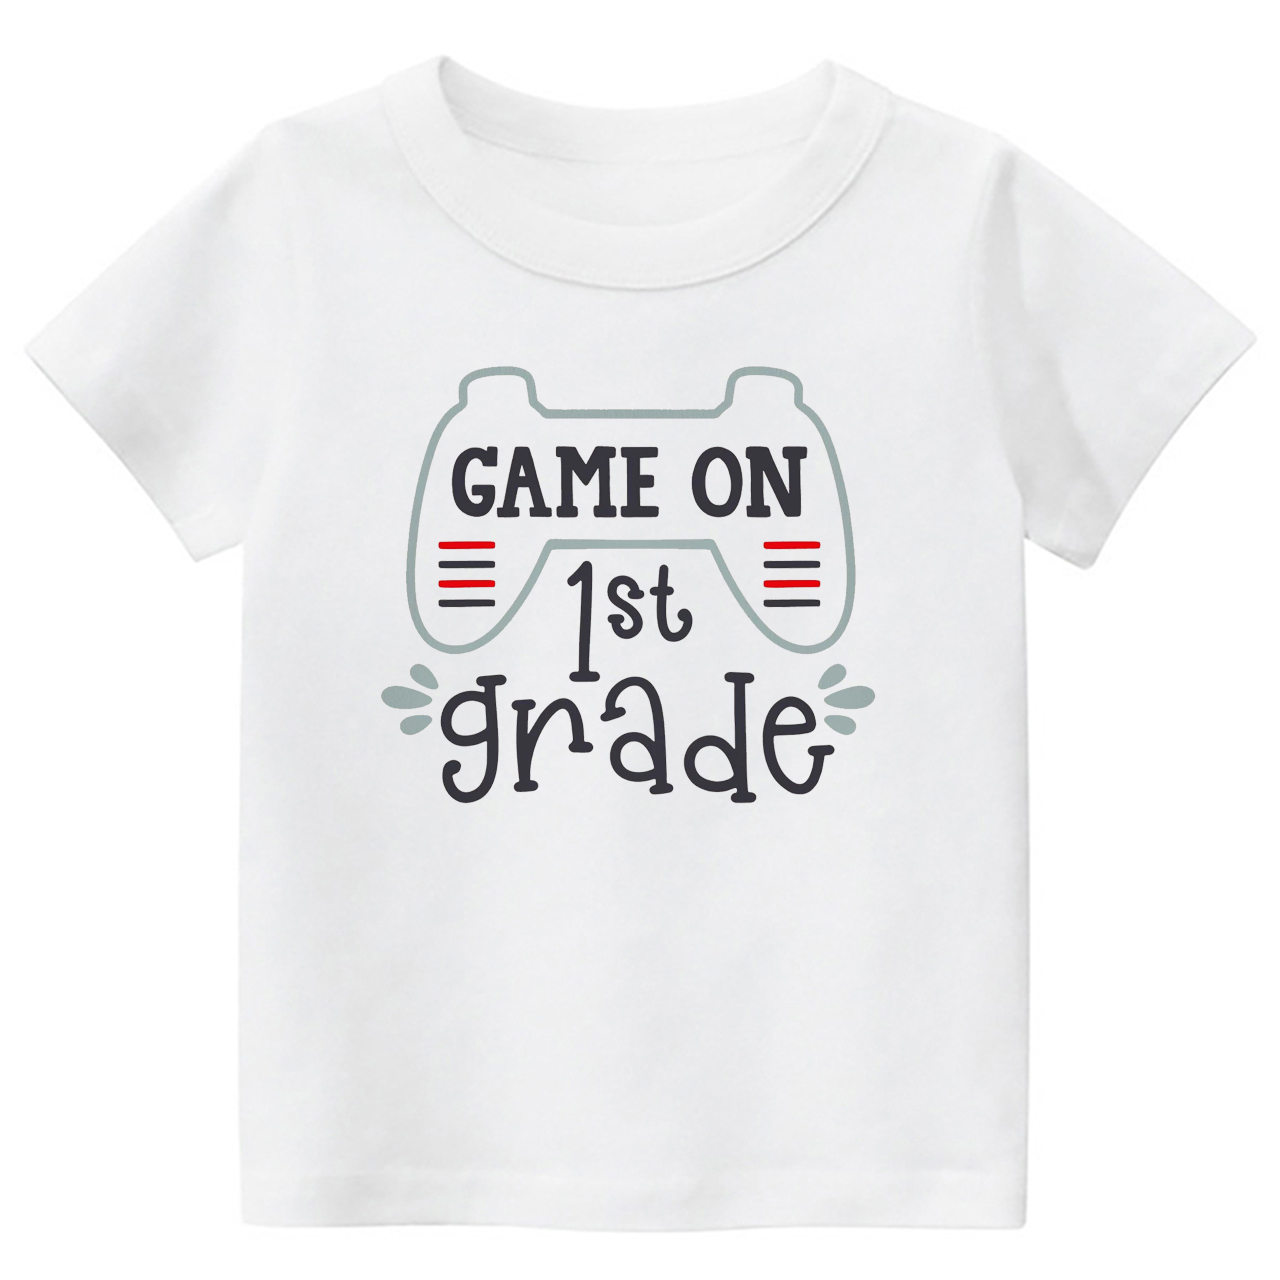 Personalized Game On XX Grade Kids Shirts